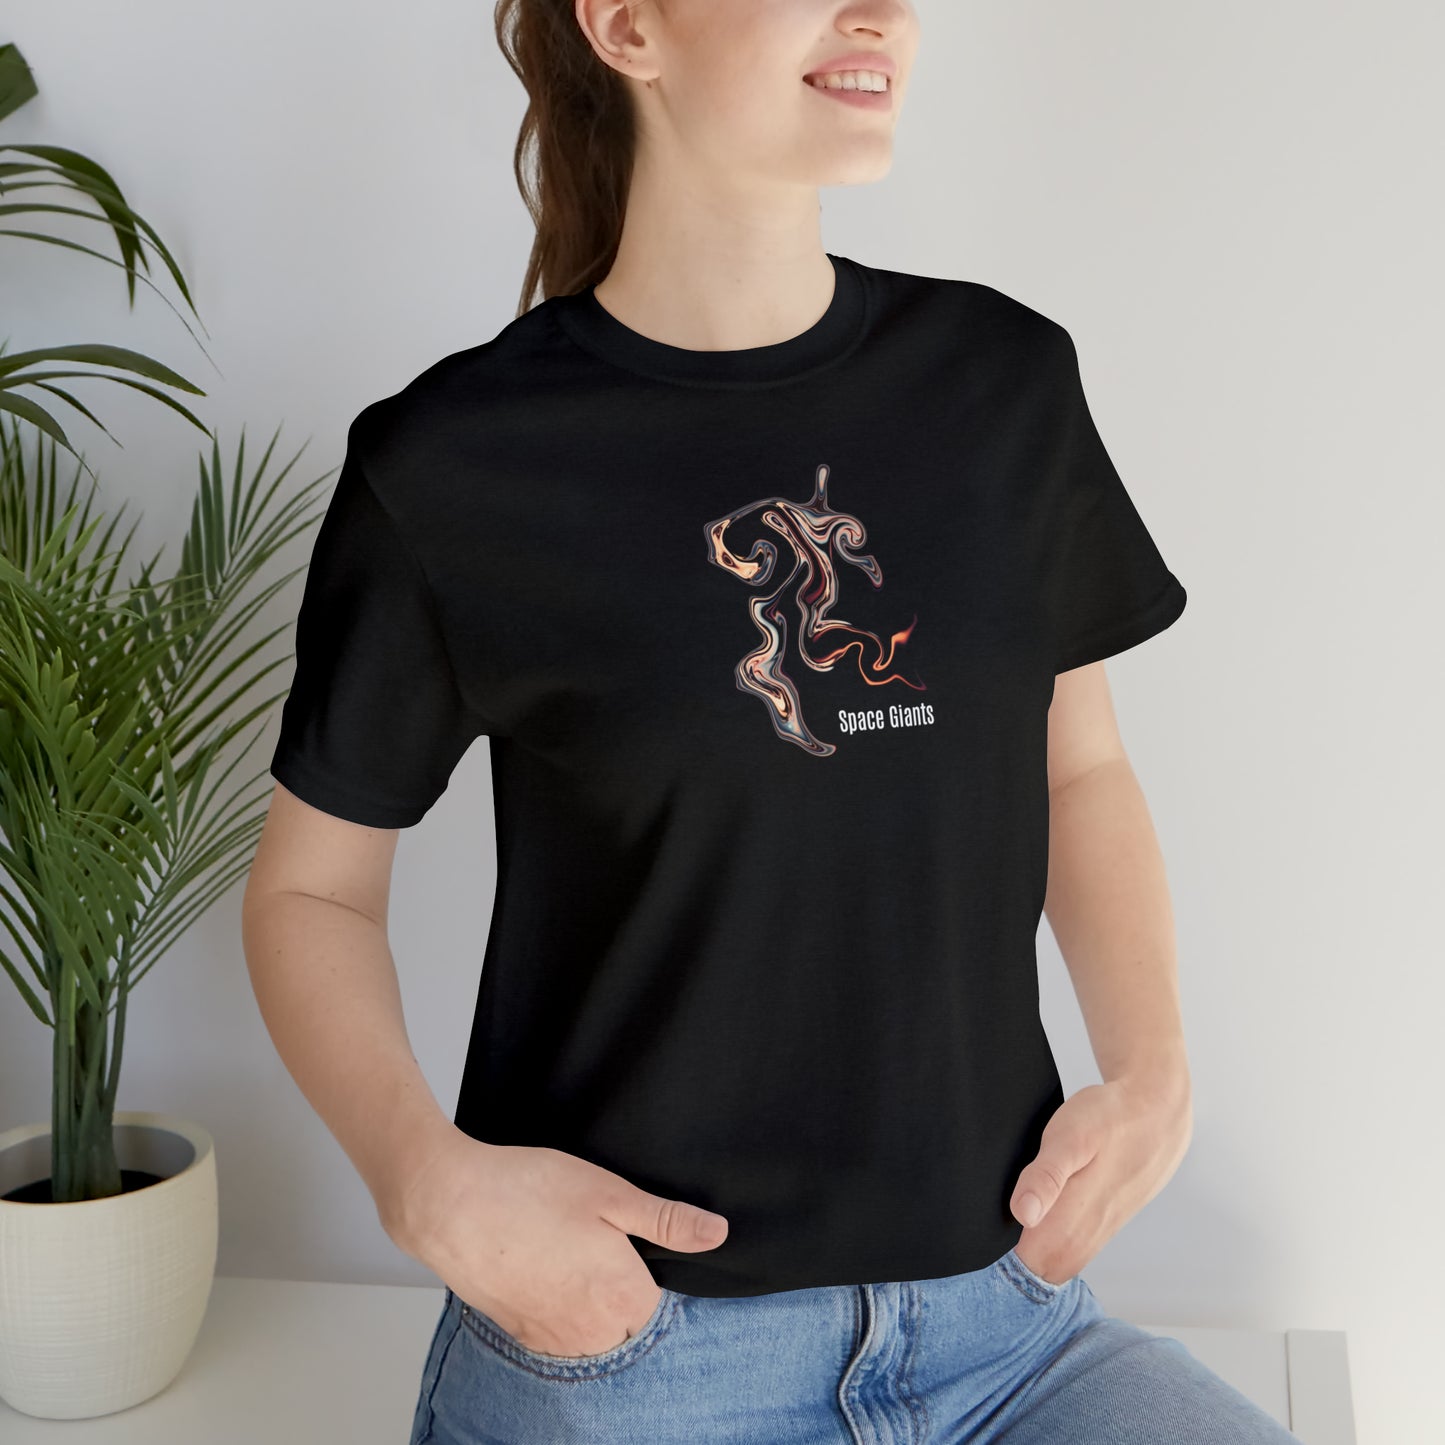 Astronomy Shirt - Space Giants